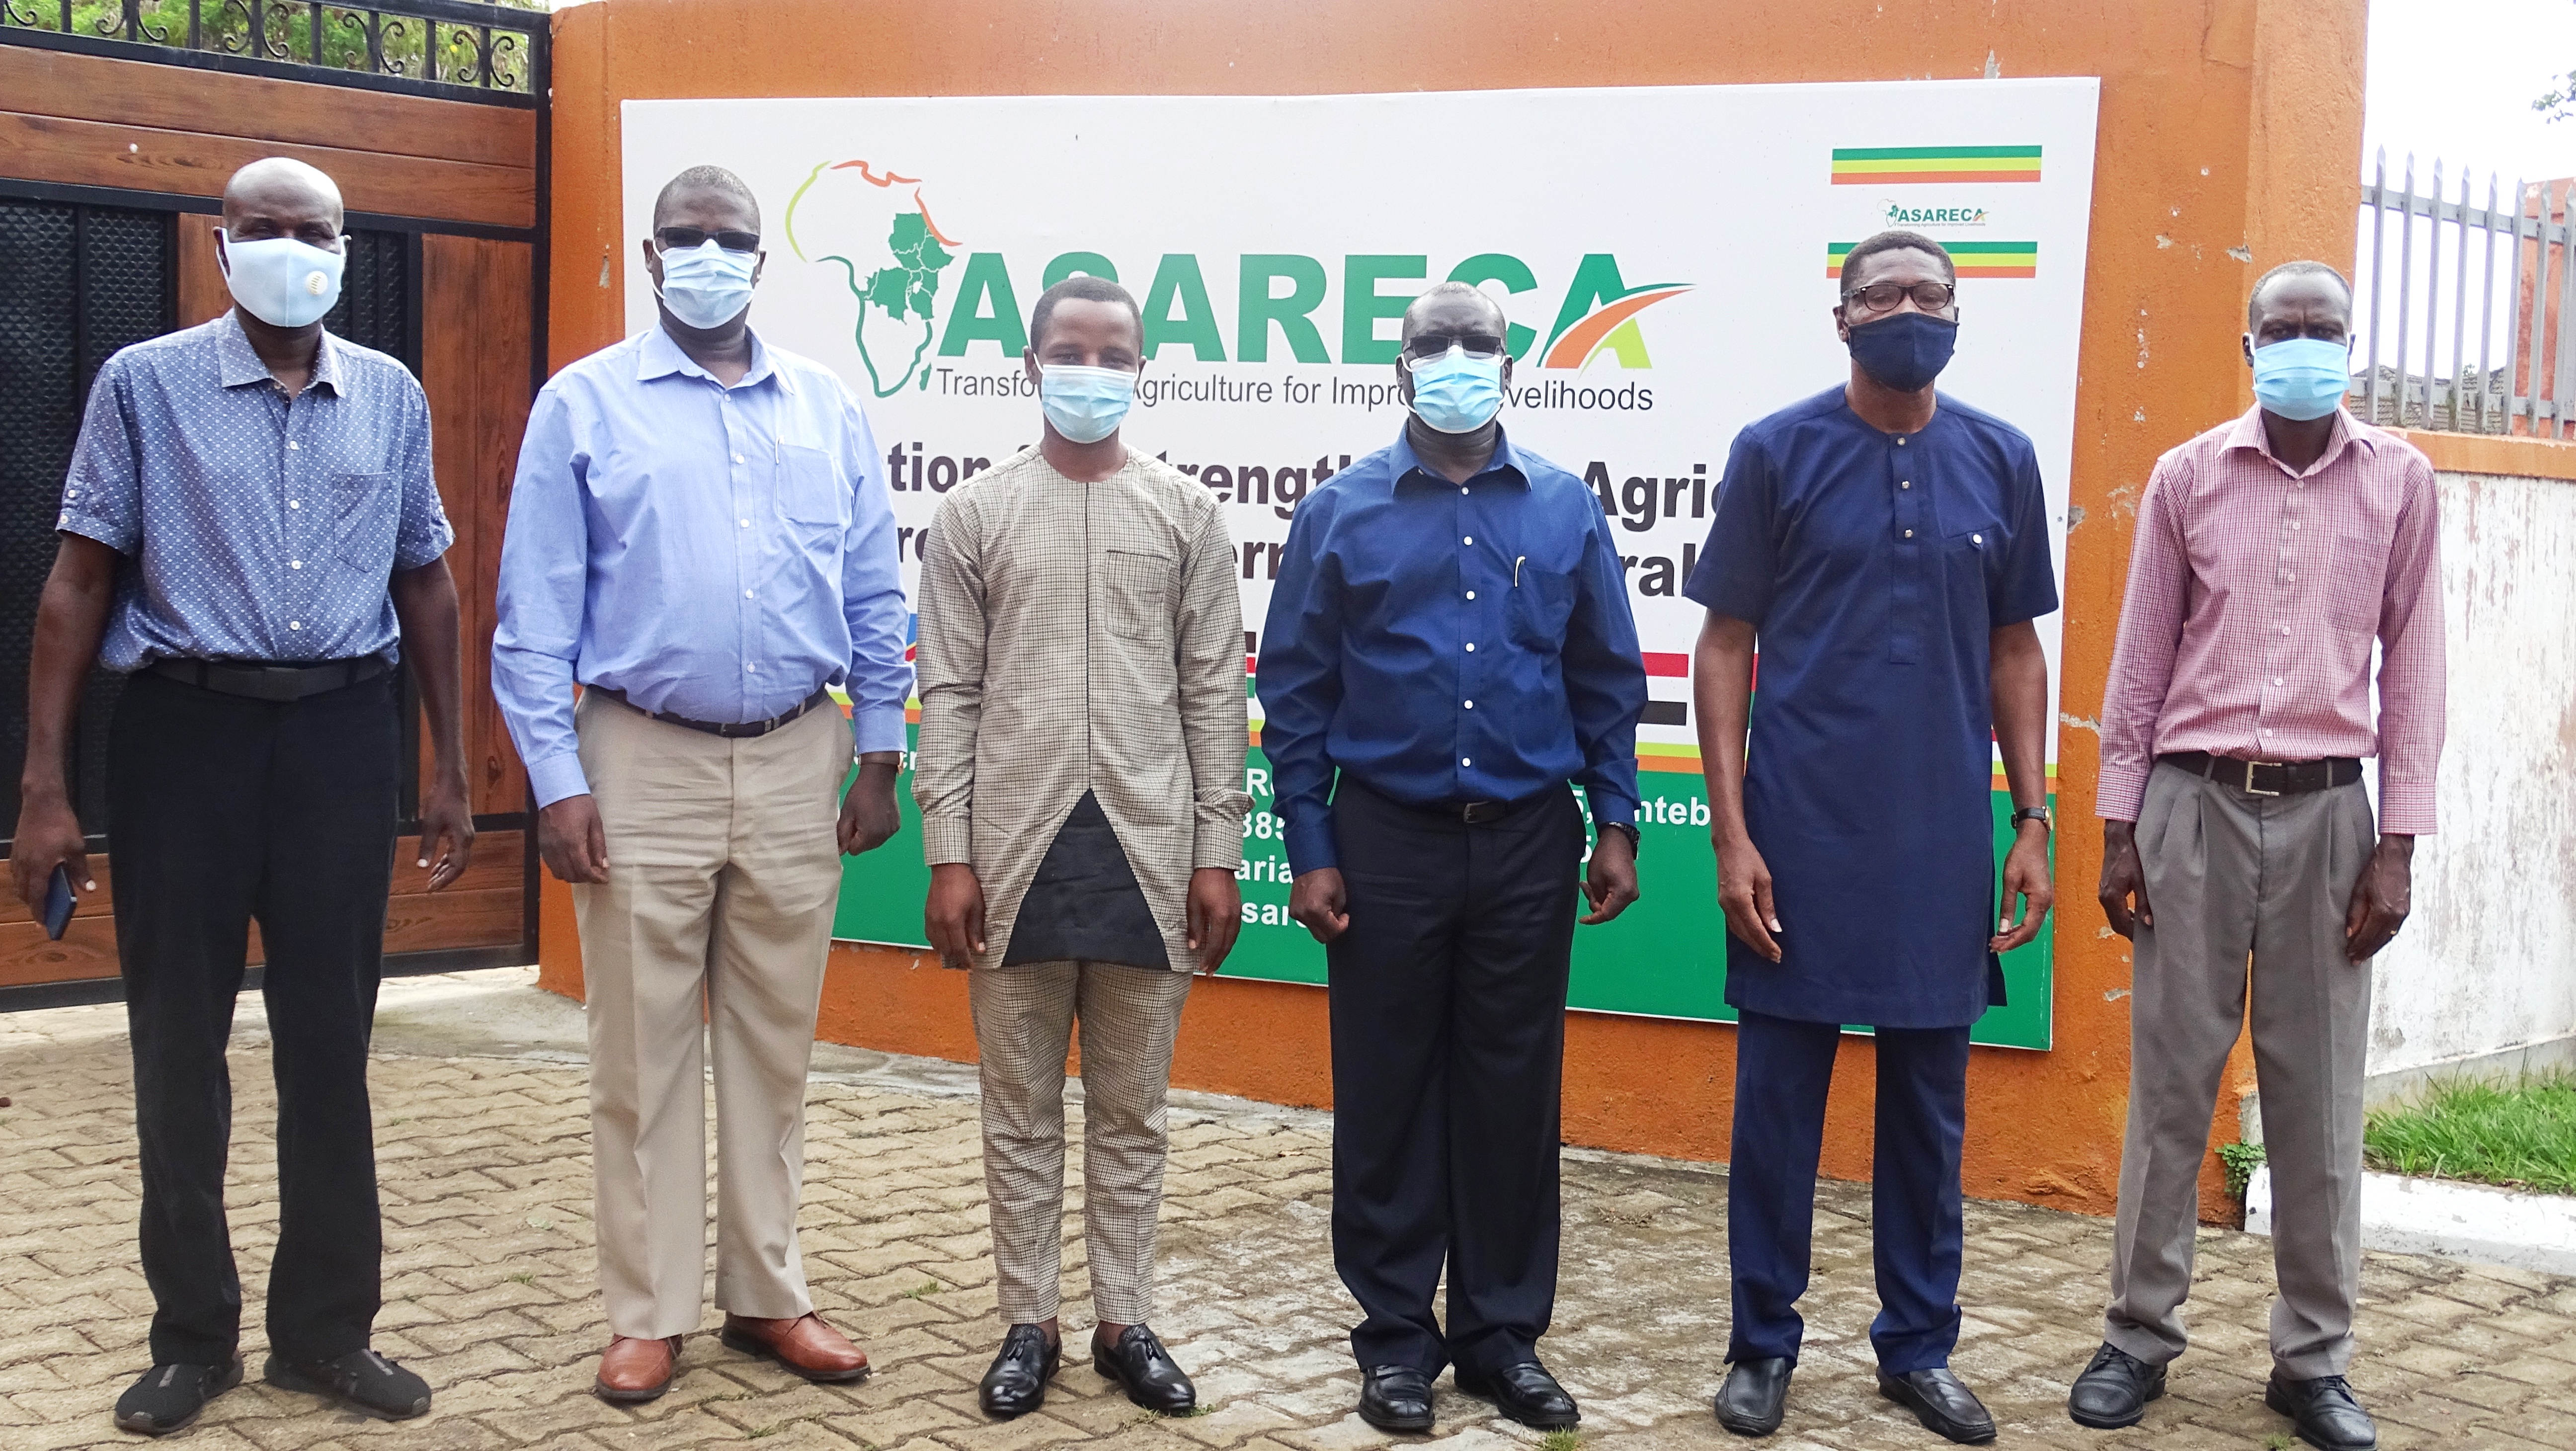 IITA Monitoring and Evaluation experts, Mr. Onyawale Abioye and Mr. Adebayo Solomon Atilade, paid a courtesy call on the Interim Executive Director (IED), Dr. Enock Warinda and staff on August 31